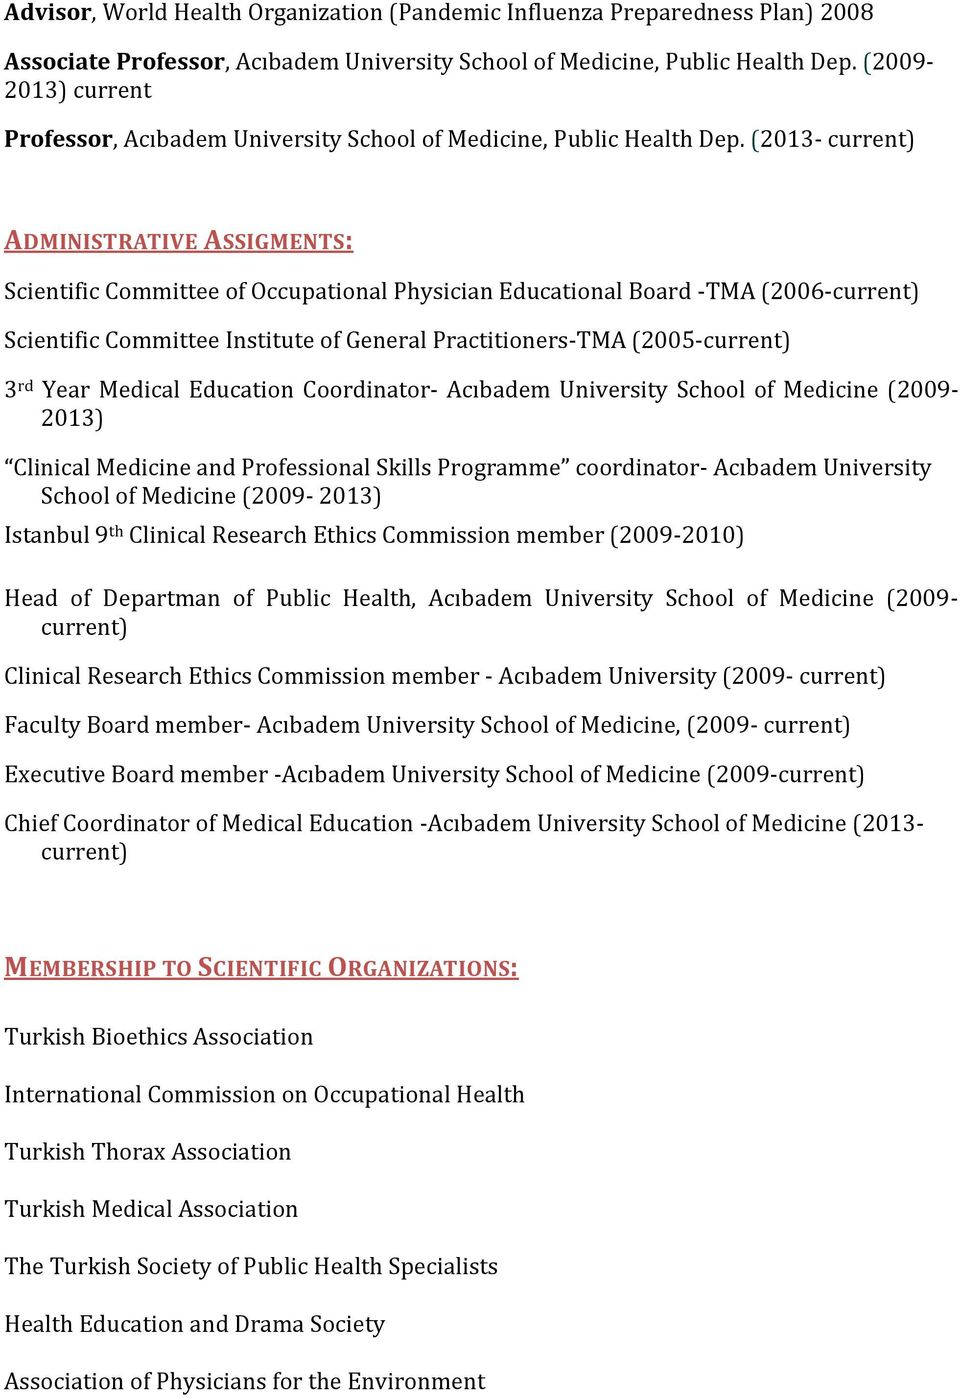 (2013- current) ADMINISTRATIVE ASSIGMENTS: Scientific Committee of Occupational Physician Educational Board -TMA (2006-current) Scientific Committee Institute of General Practitioners-TMA